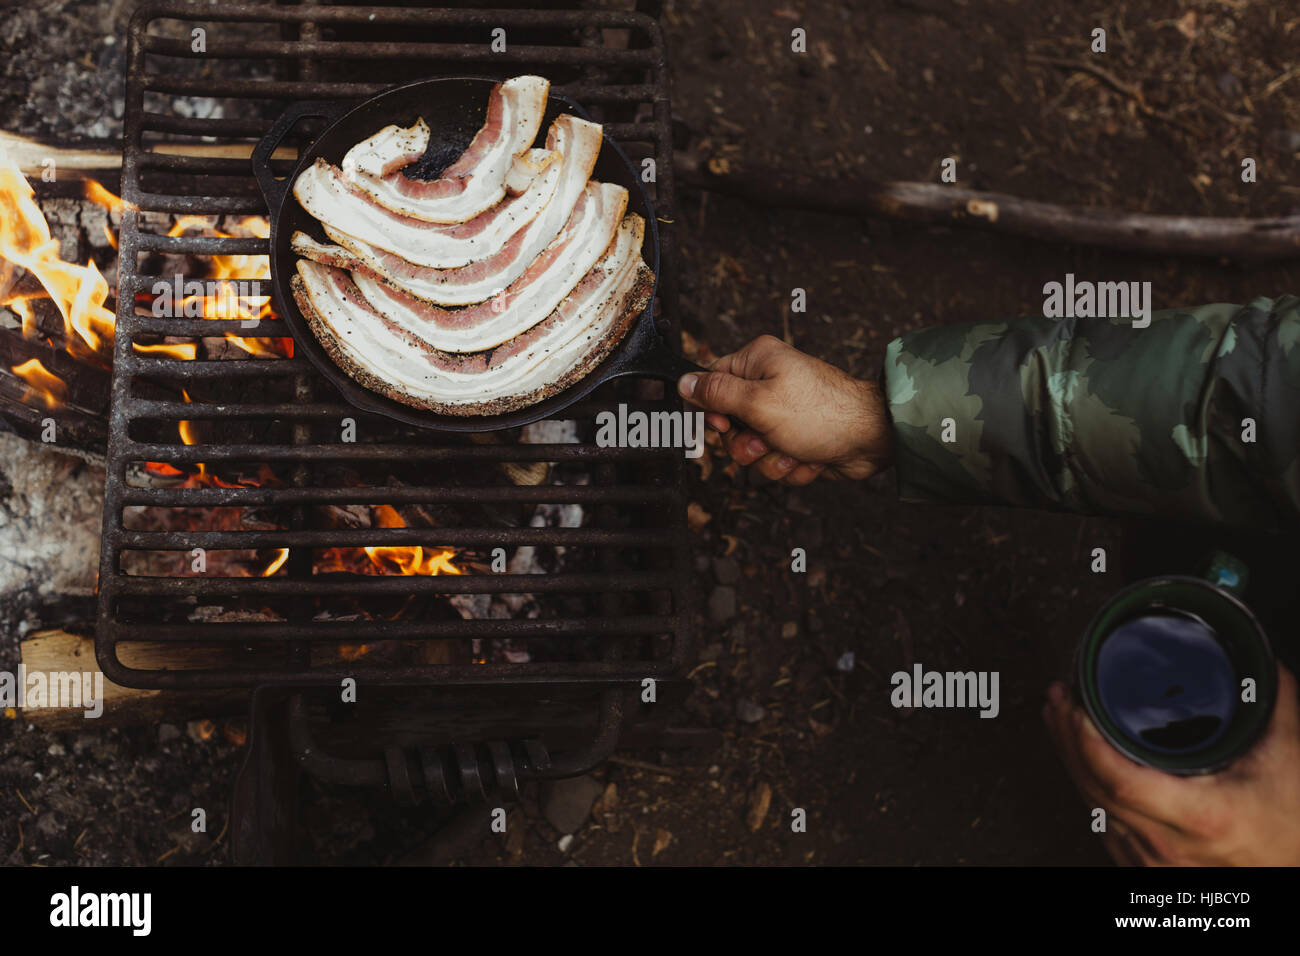 Hands of male hiker frying bacon on campfire, Mineral King, Sequoia National Park, California, USA Stock Photo